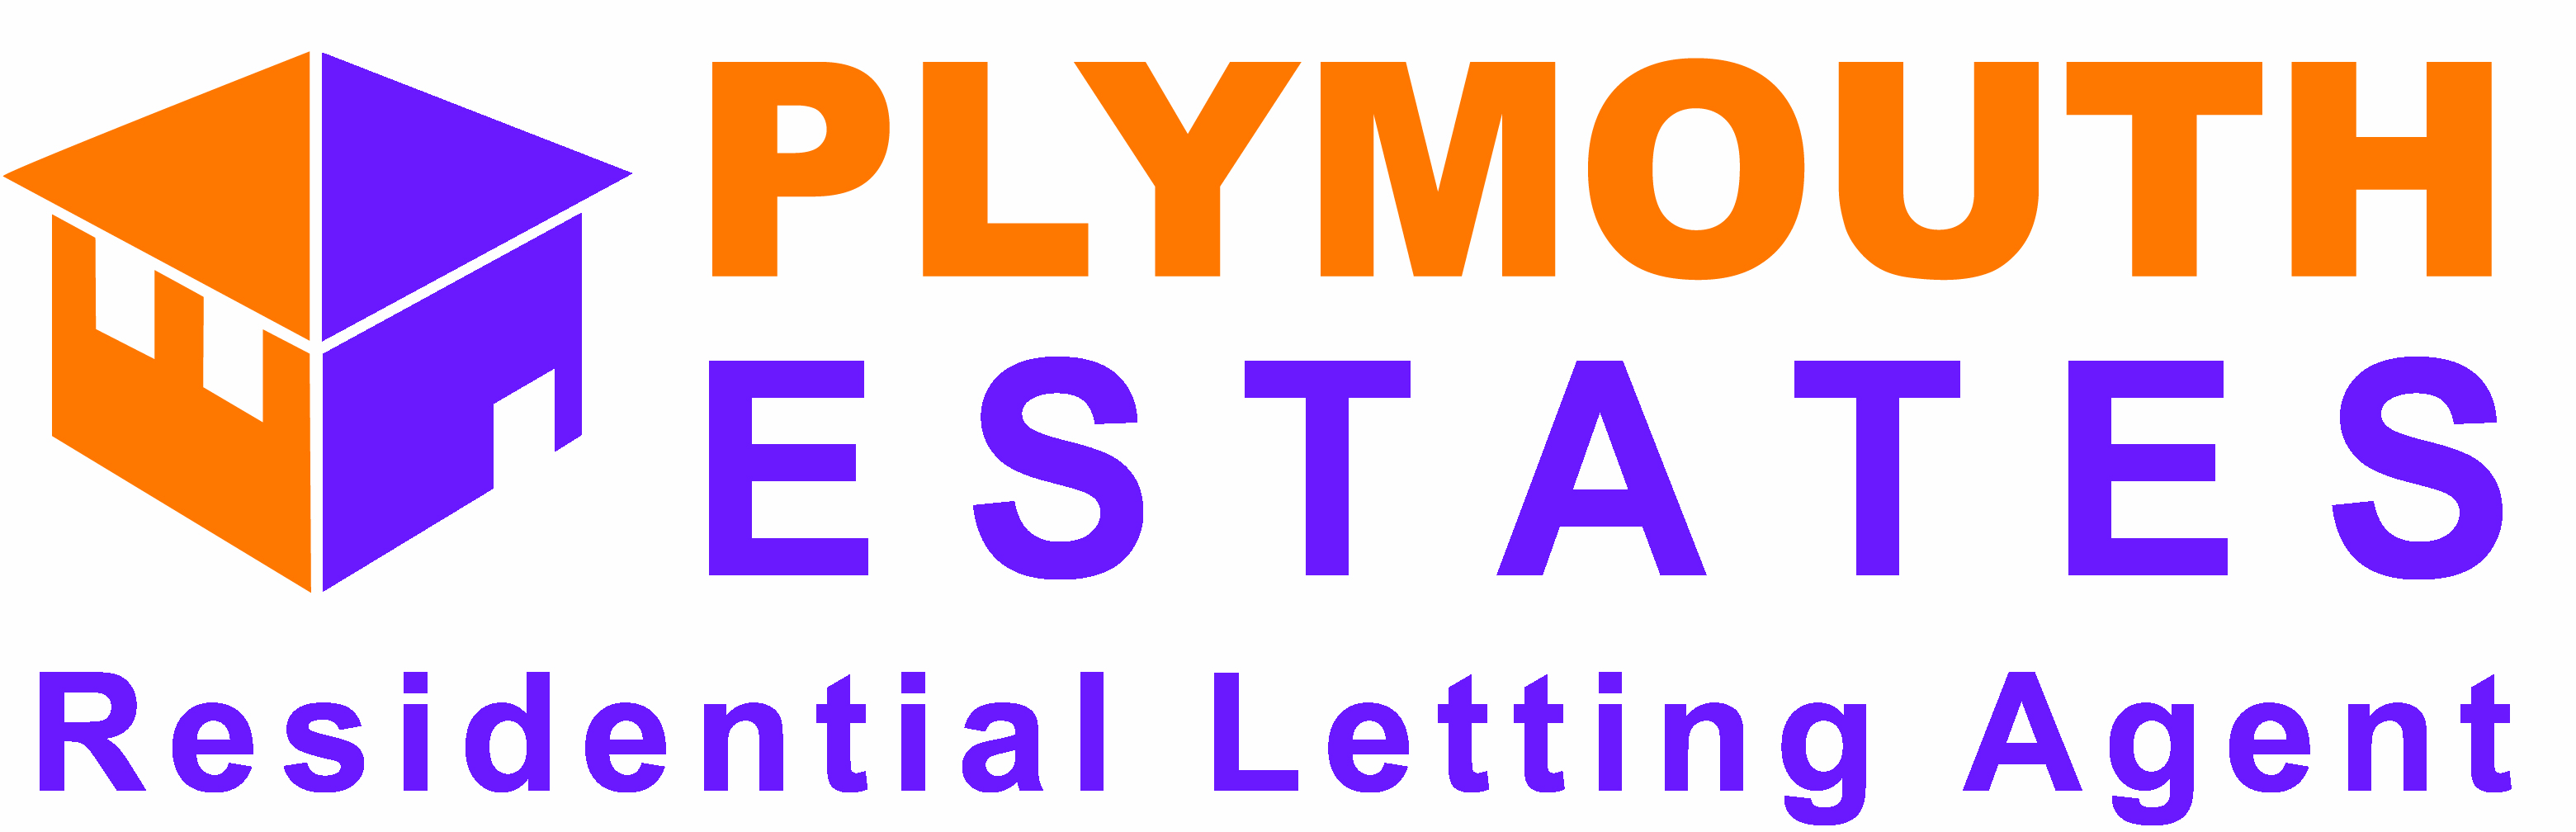 Interim Inspection Report by Plymouth Estates Ltd for Residential Properties